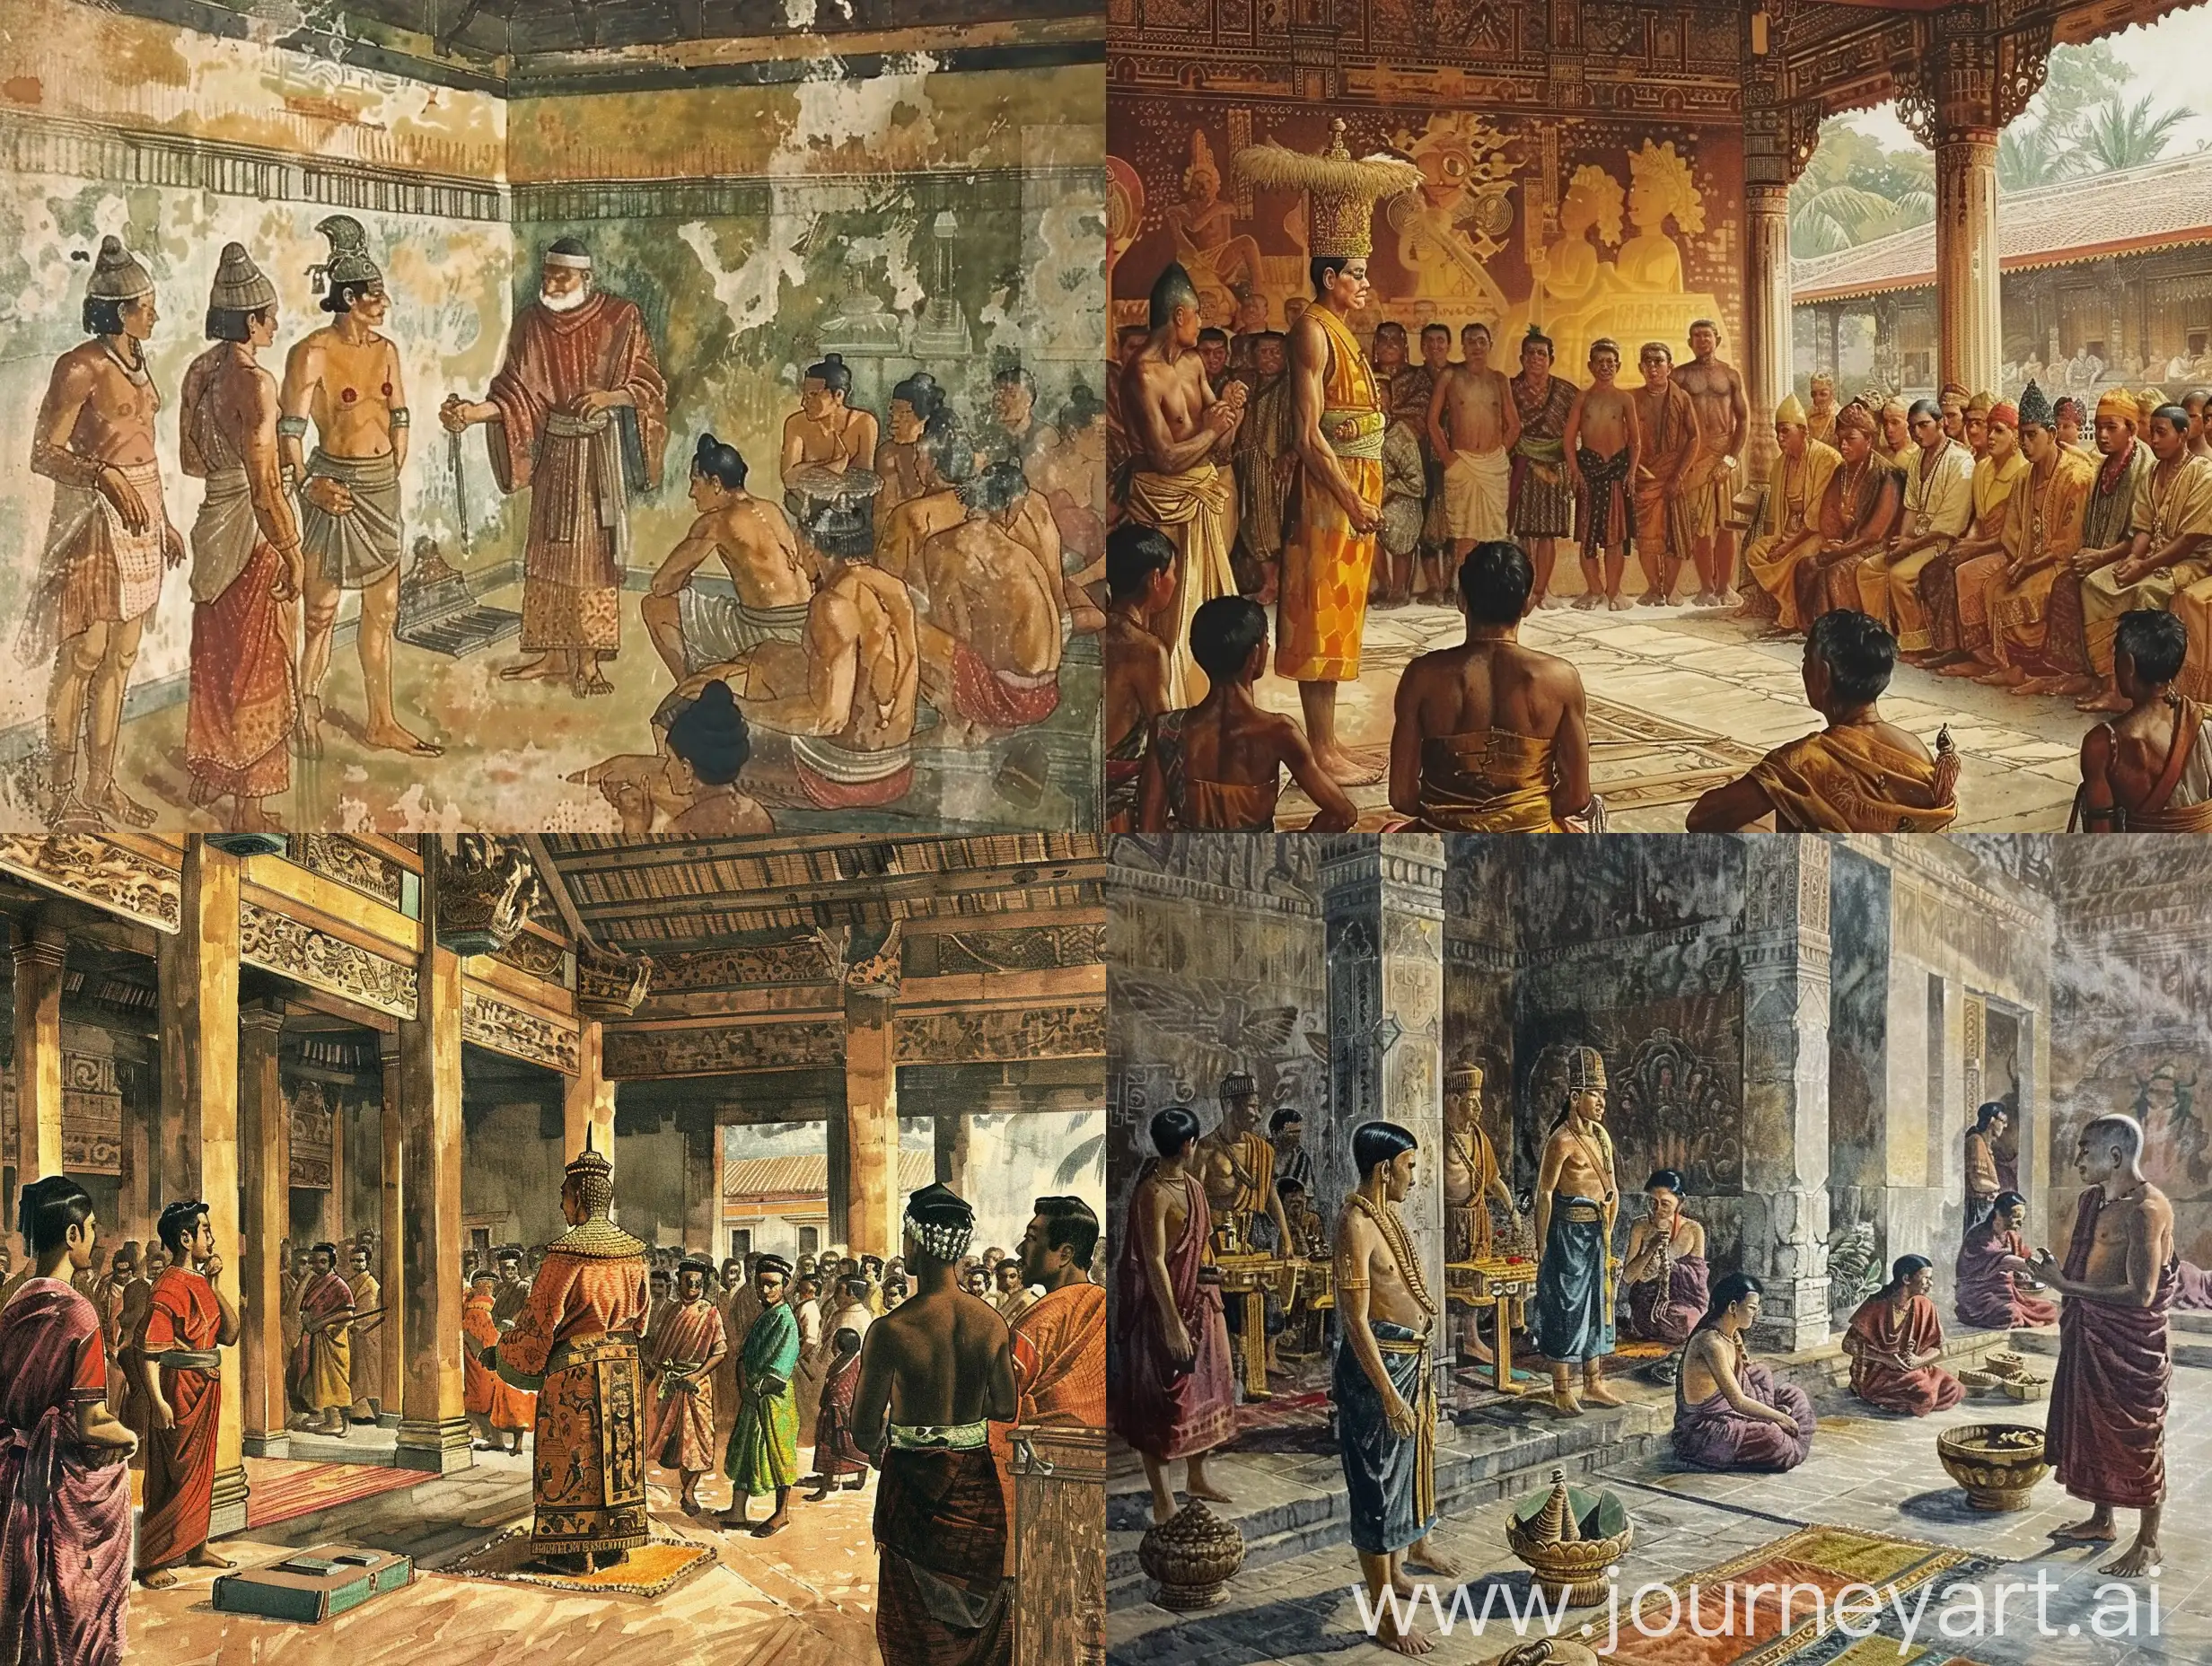 Majapahit kingdom in 1200, color, In the royal room, the king was seen with his people